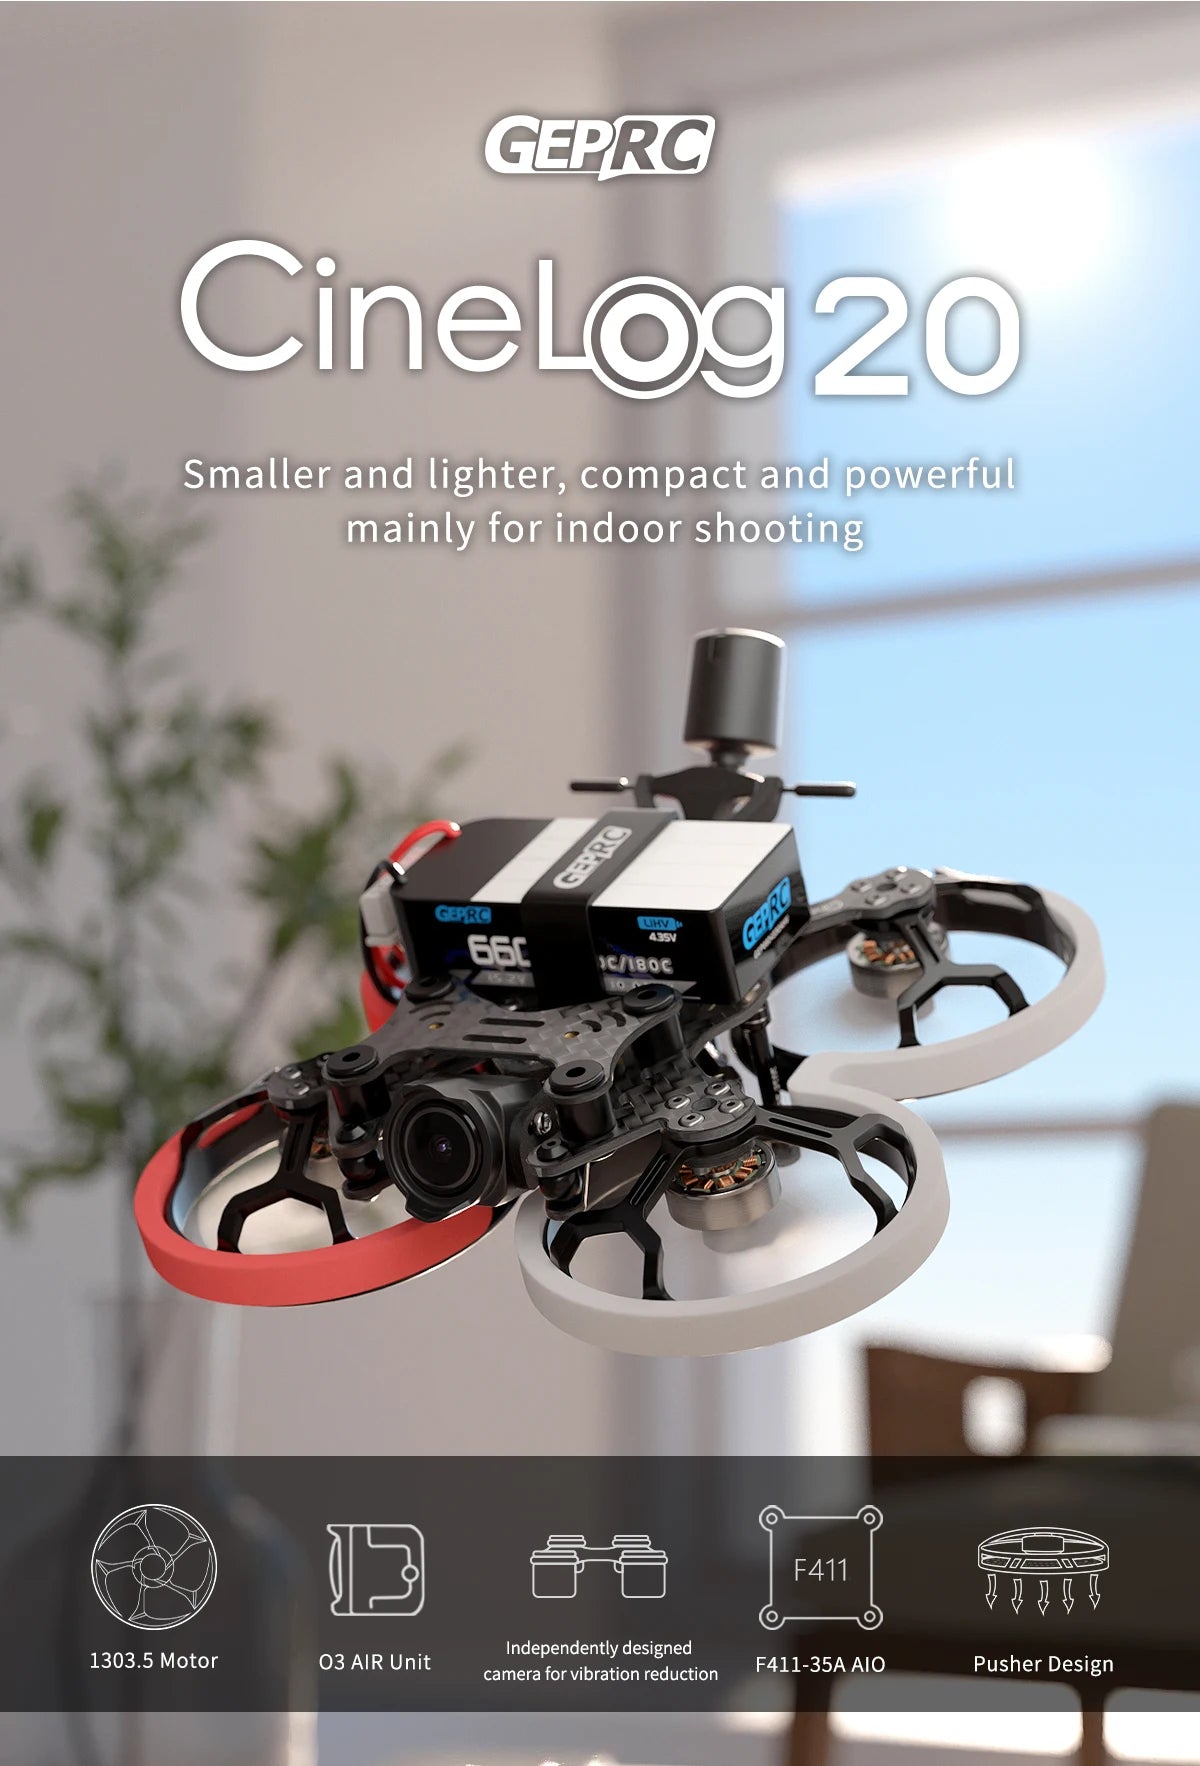 GEPRC Cinelog20 HD Wasp FPV Drone, GEPRC CineLog20 Smaller and lighter; compact and powerful mainly for indoor shooting